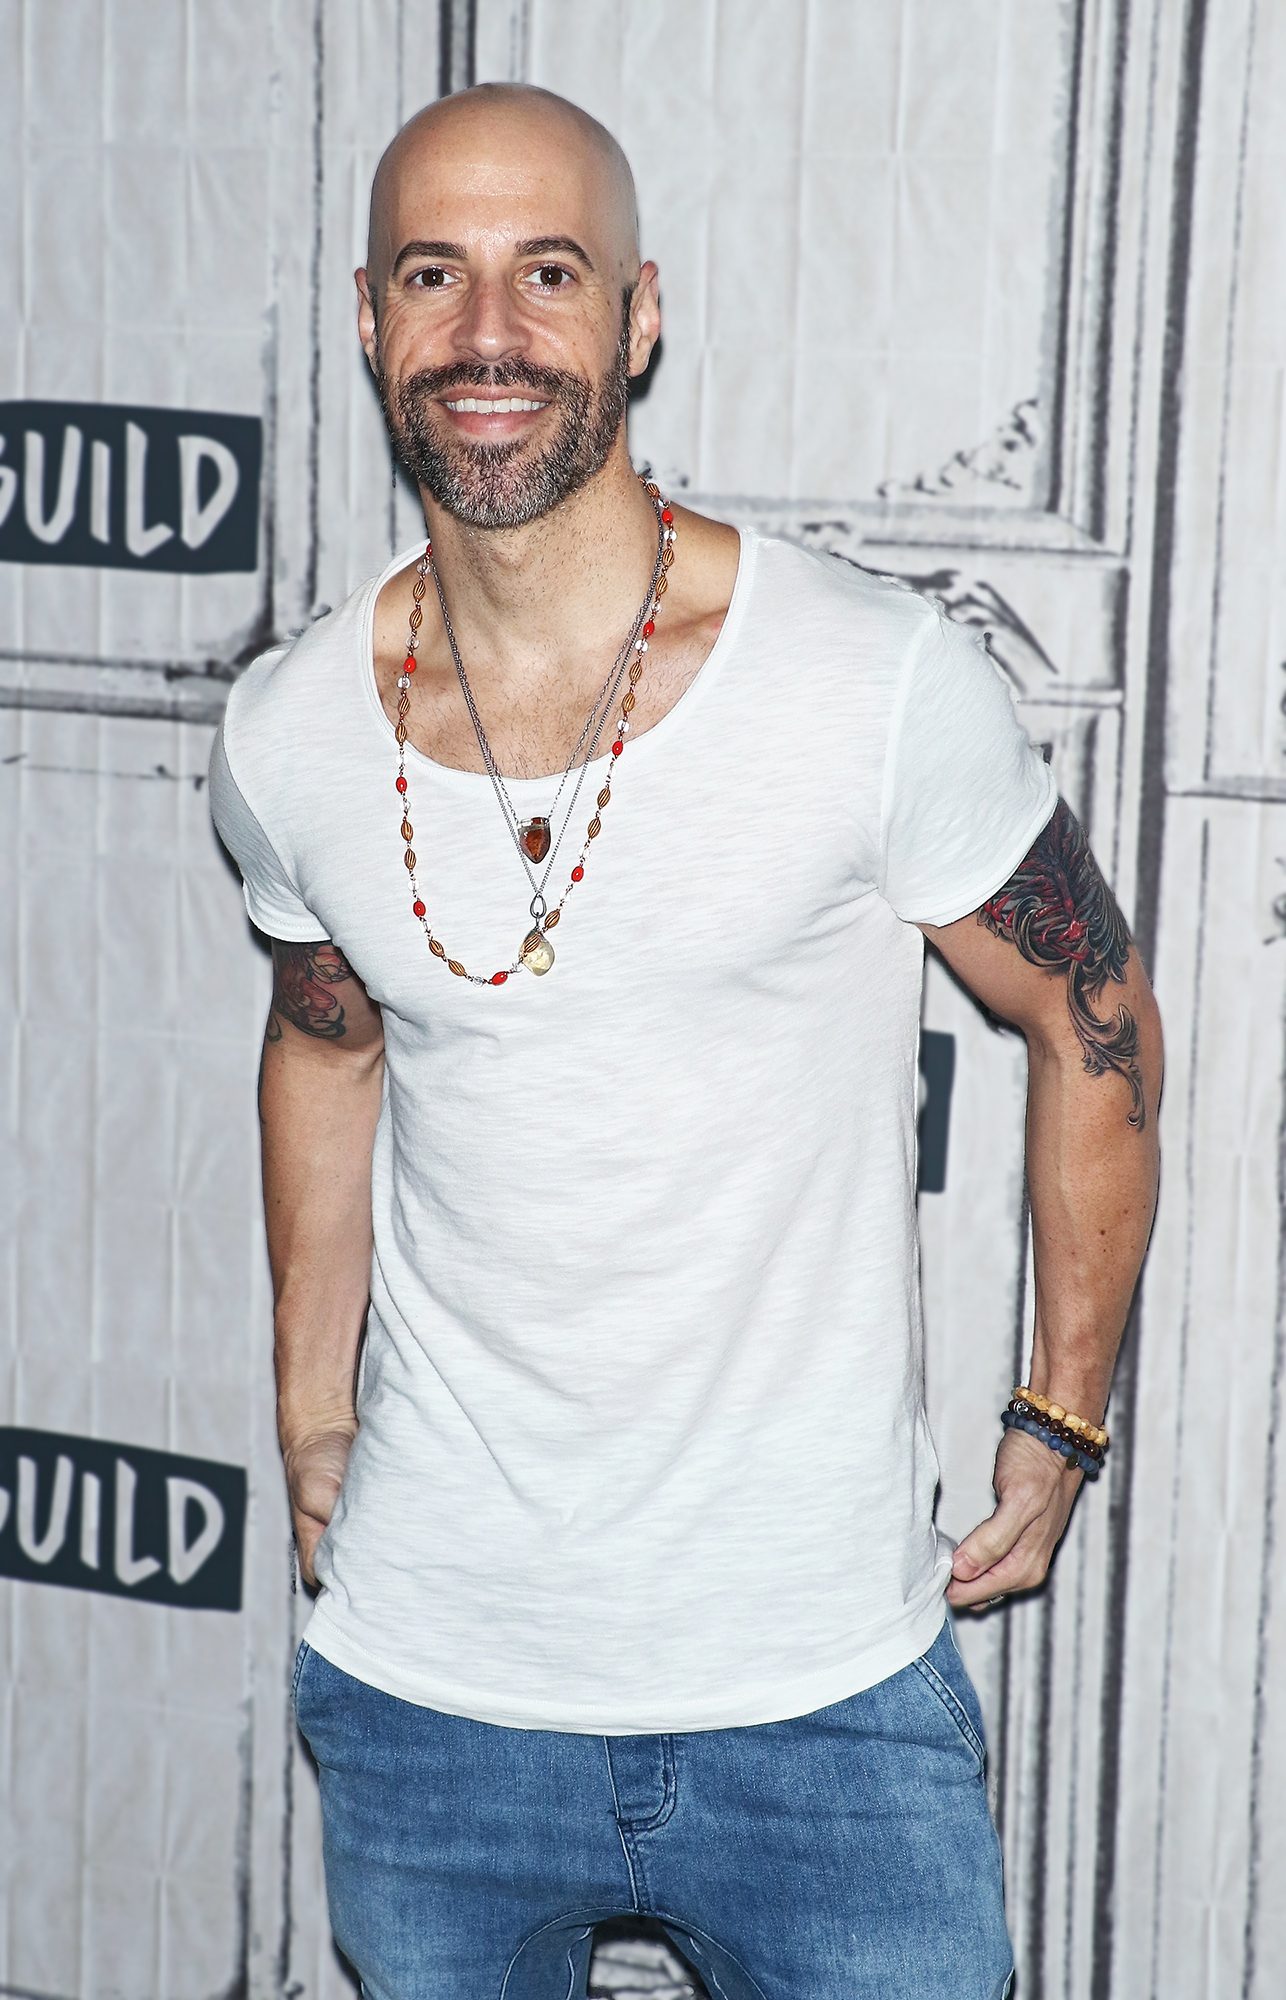 chris daughtry workout